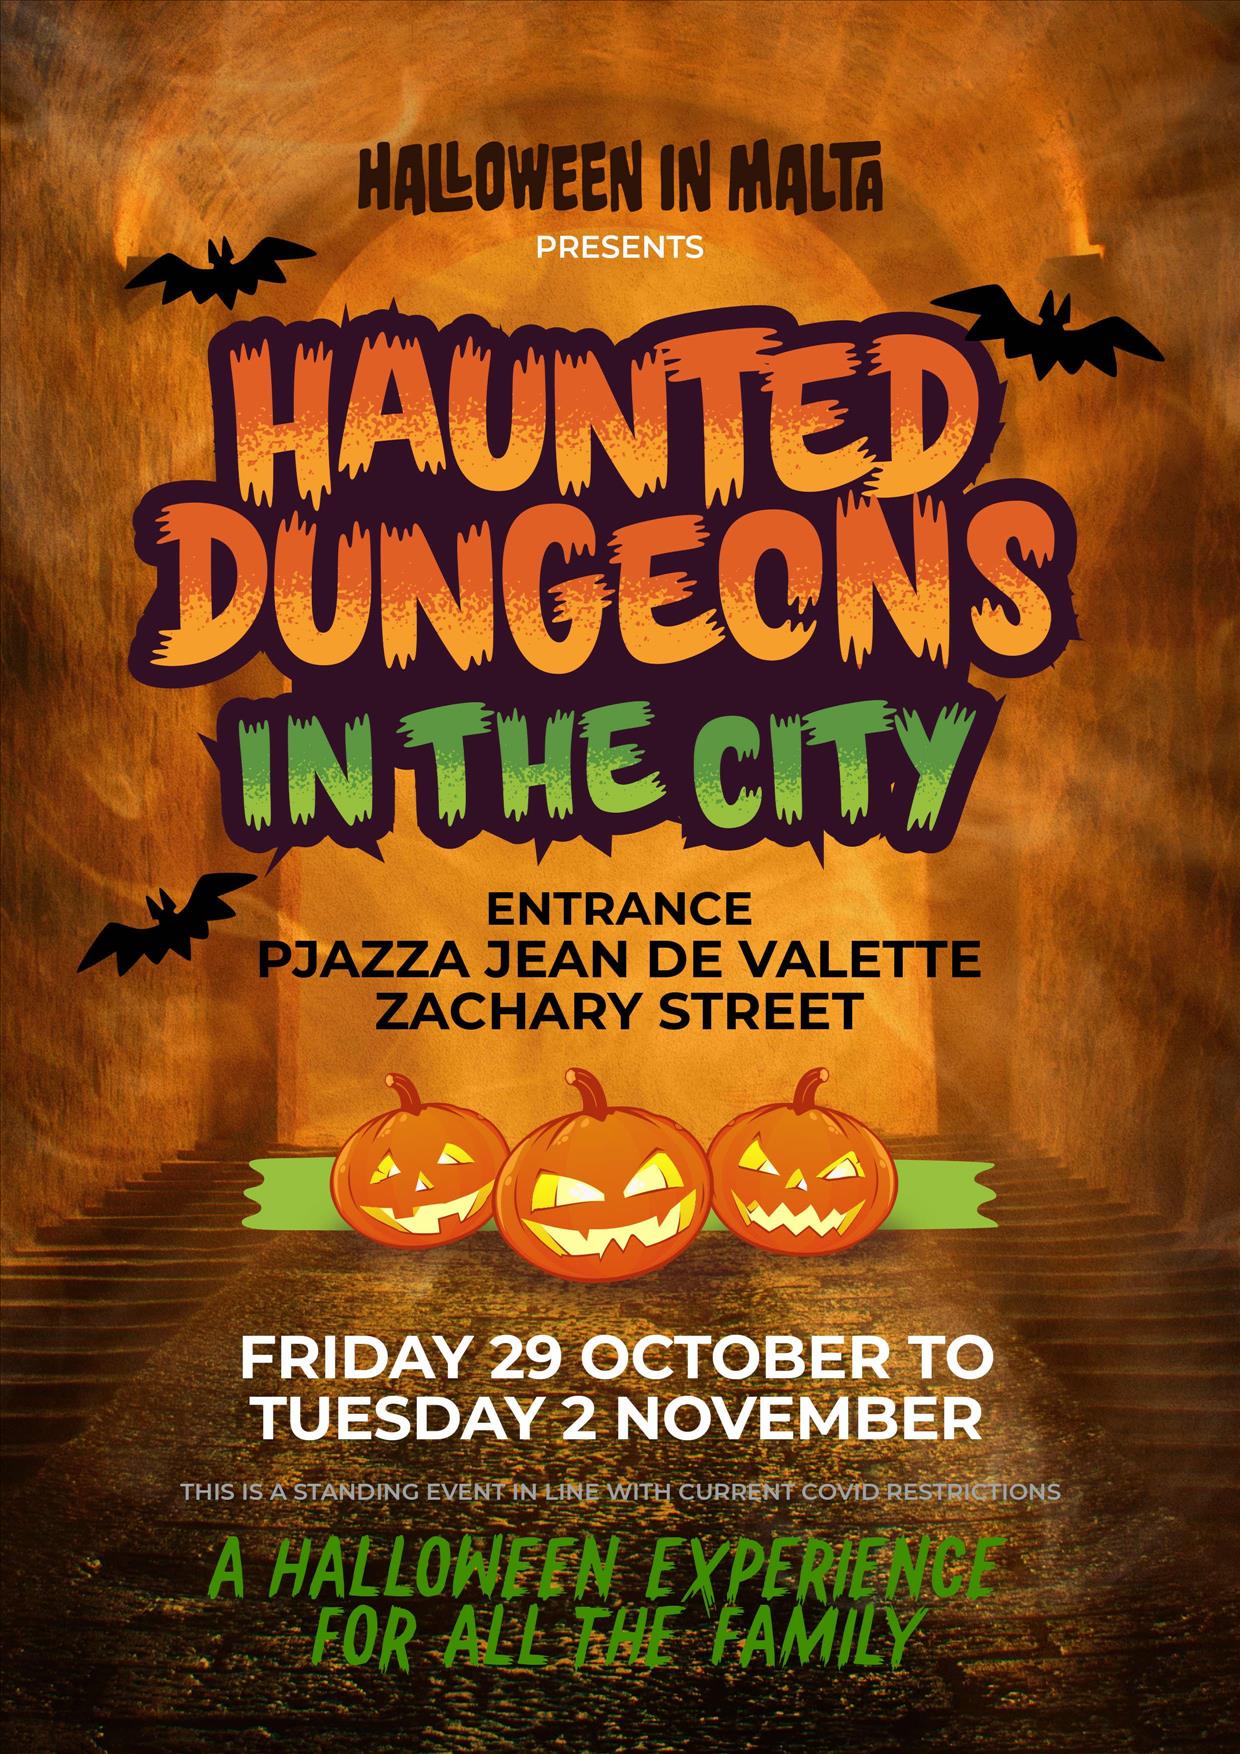 Halloween in Malta presents The Haunted Dungeons in the city poster